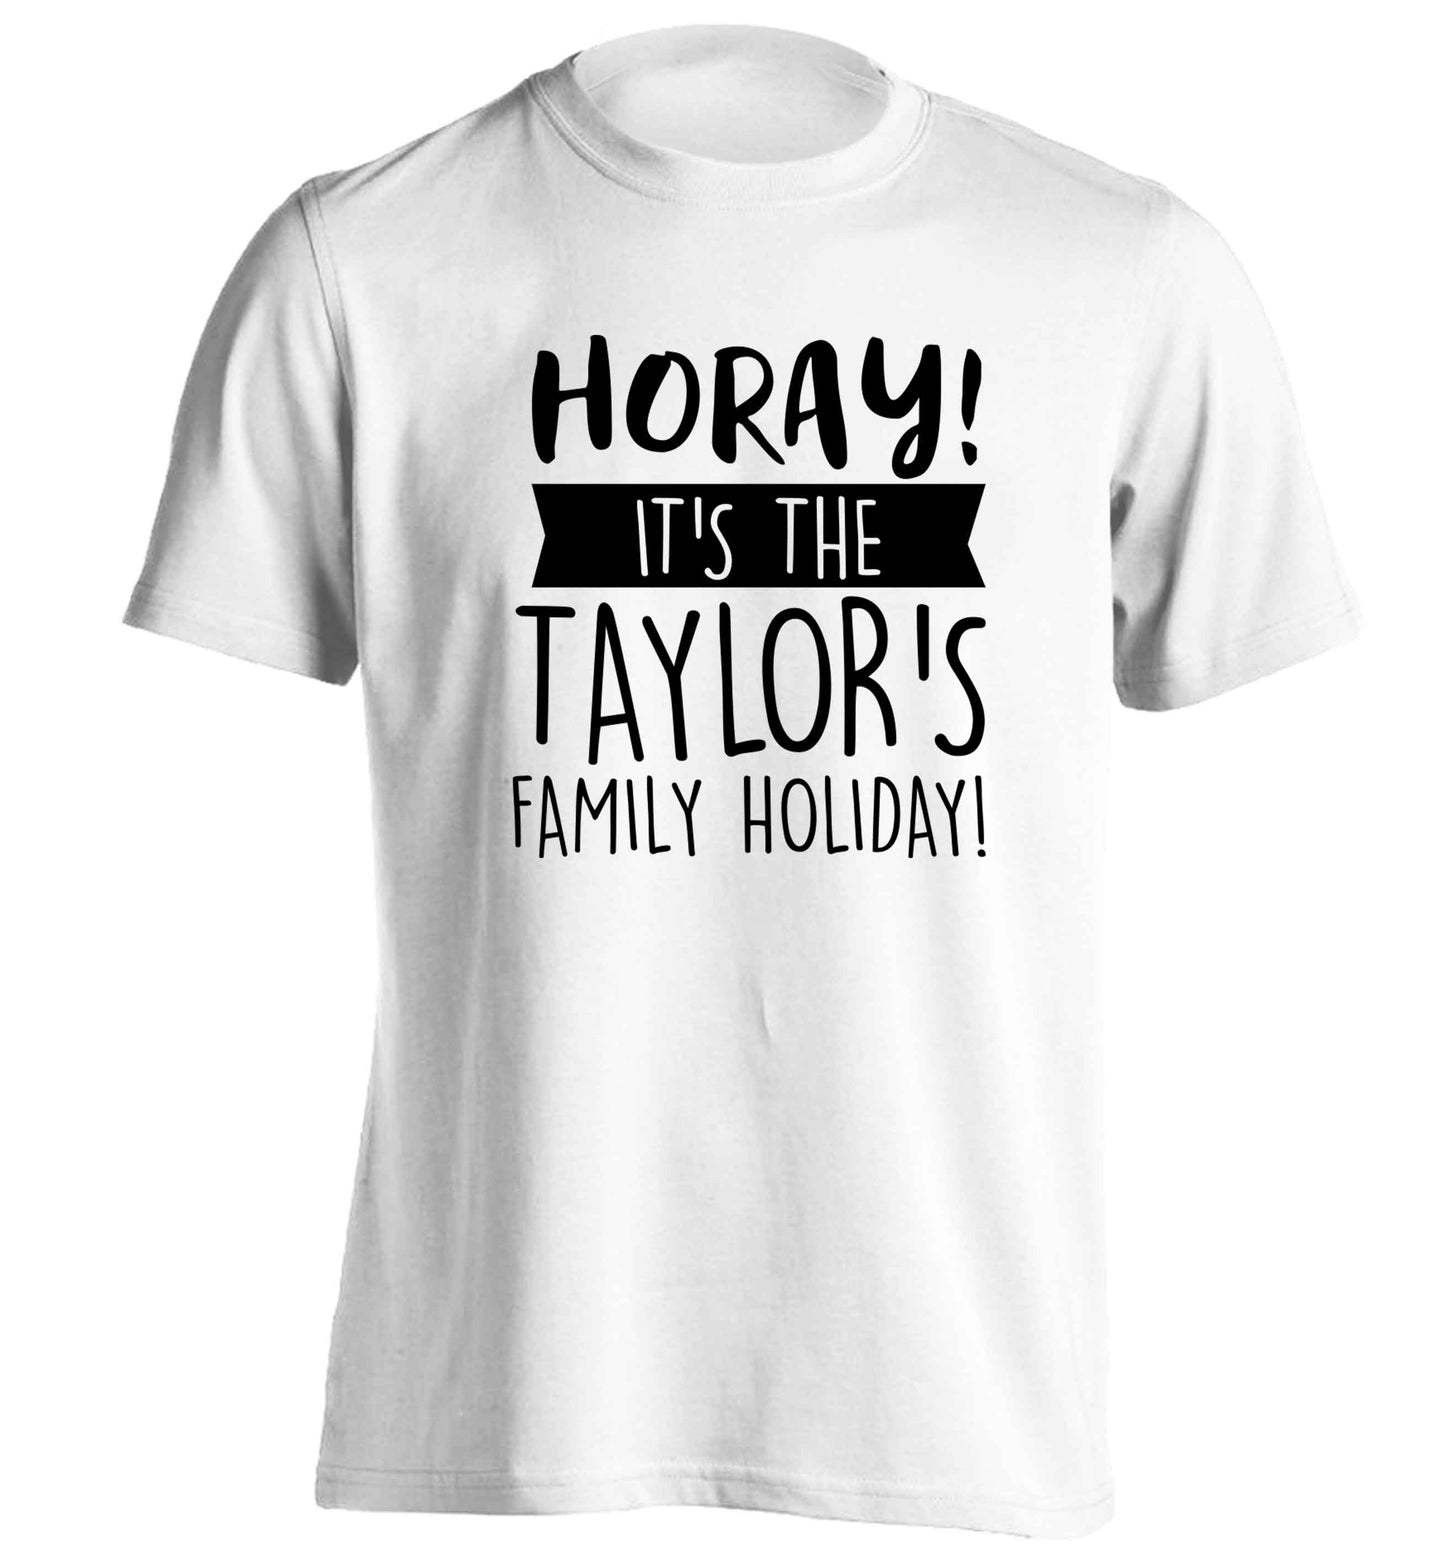 Horay it's the Taylor's family holiday! personalised item adults unisex white Tshirt 2XL